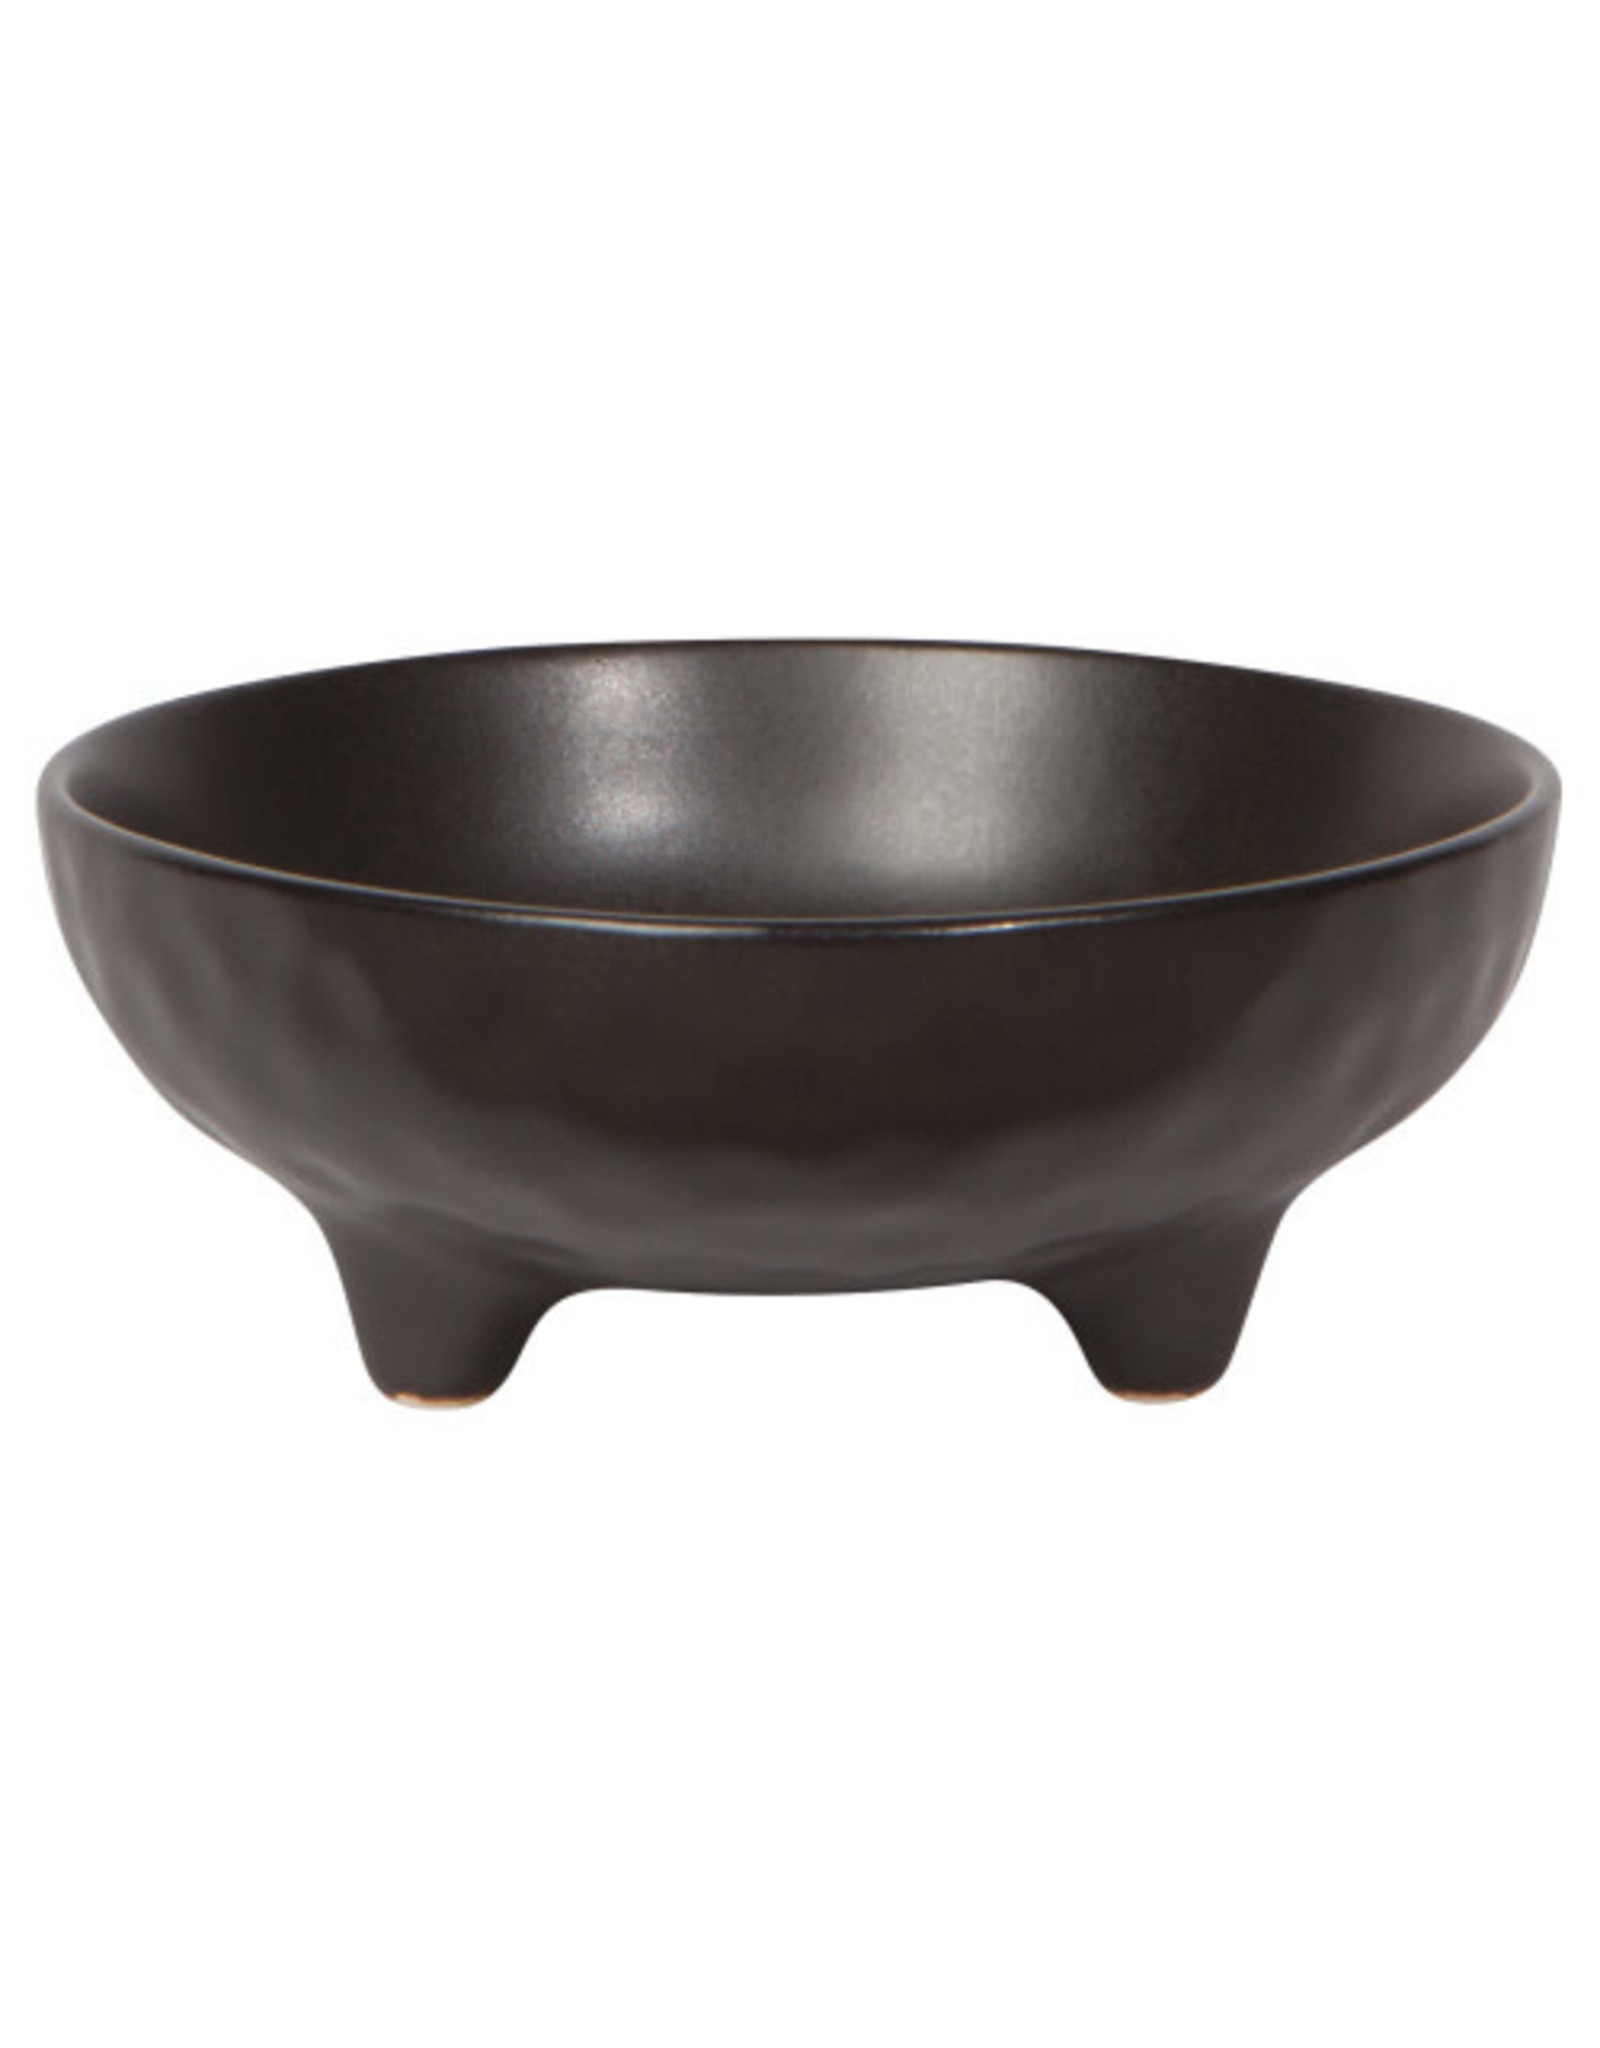 Black Footed Bowl